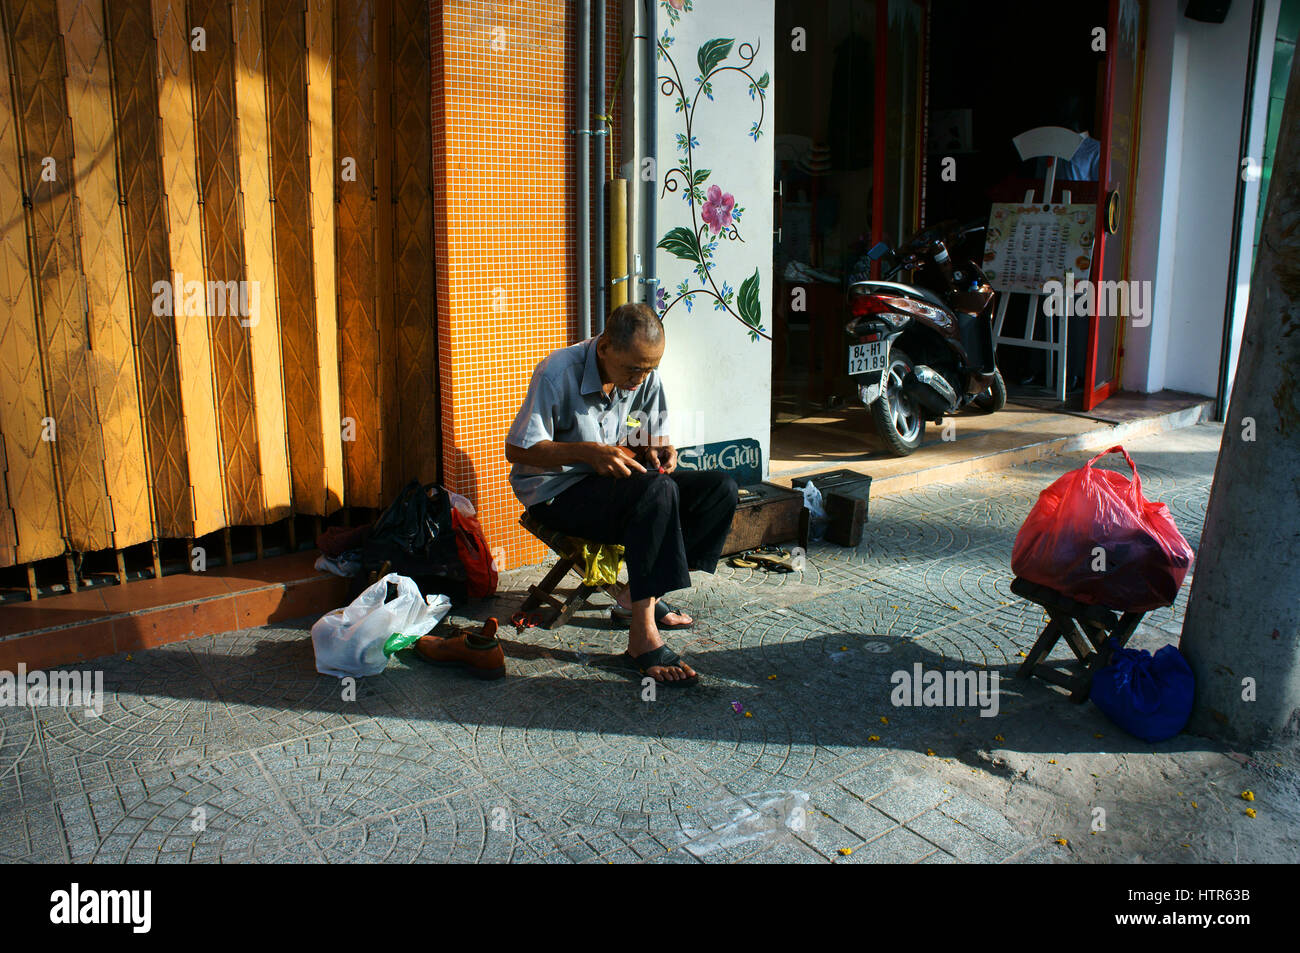 HO CHI MINH CITY, VIET NAM, senior Vietnamese man working on sidewalk, he repair shoes for customer, many poor people earning money by this, Vietnam Stock Photo